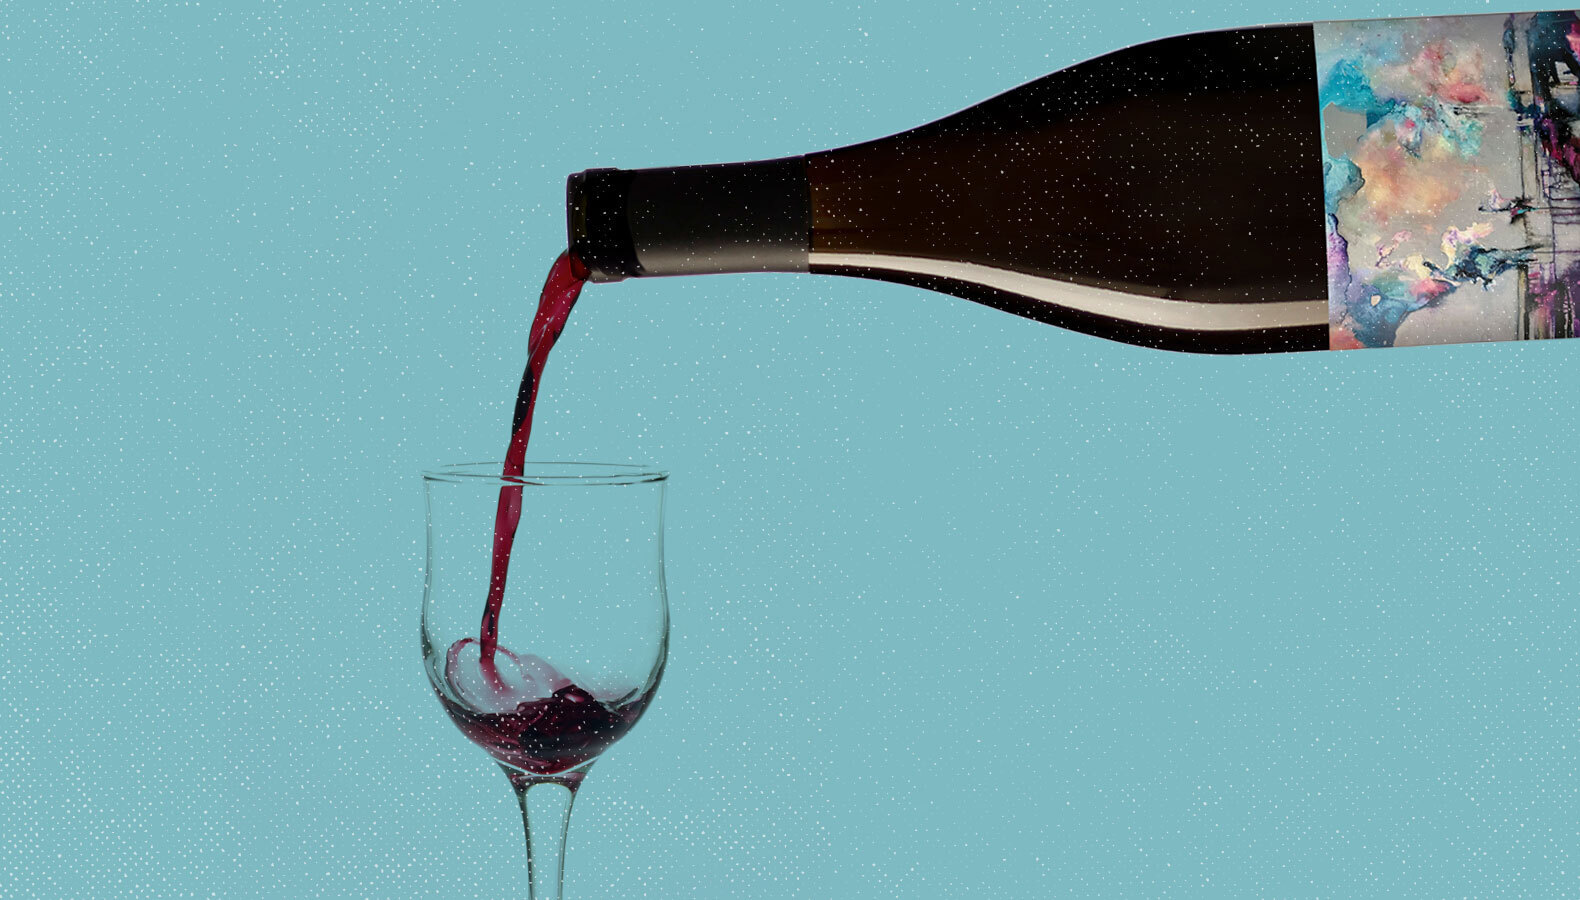 An illustration of a bottle of wine pouring into a glass